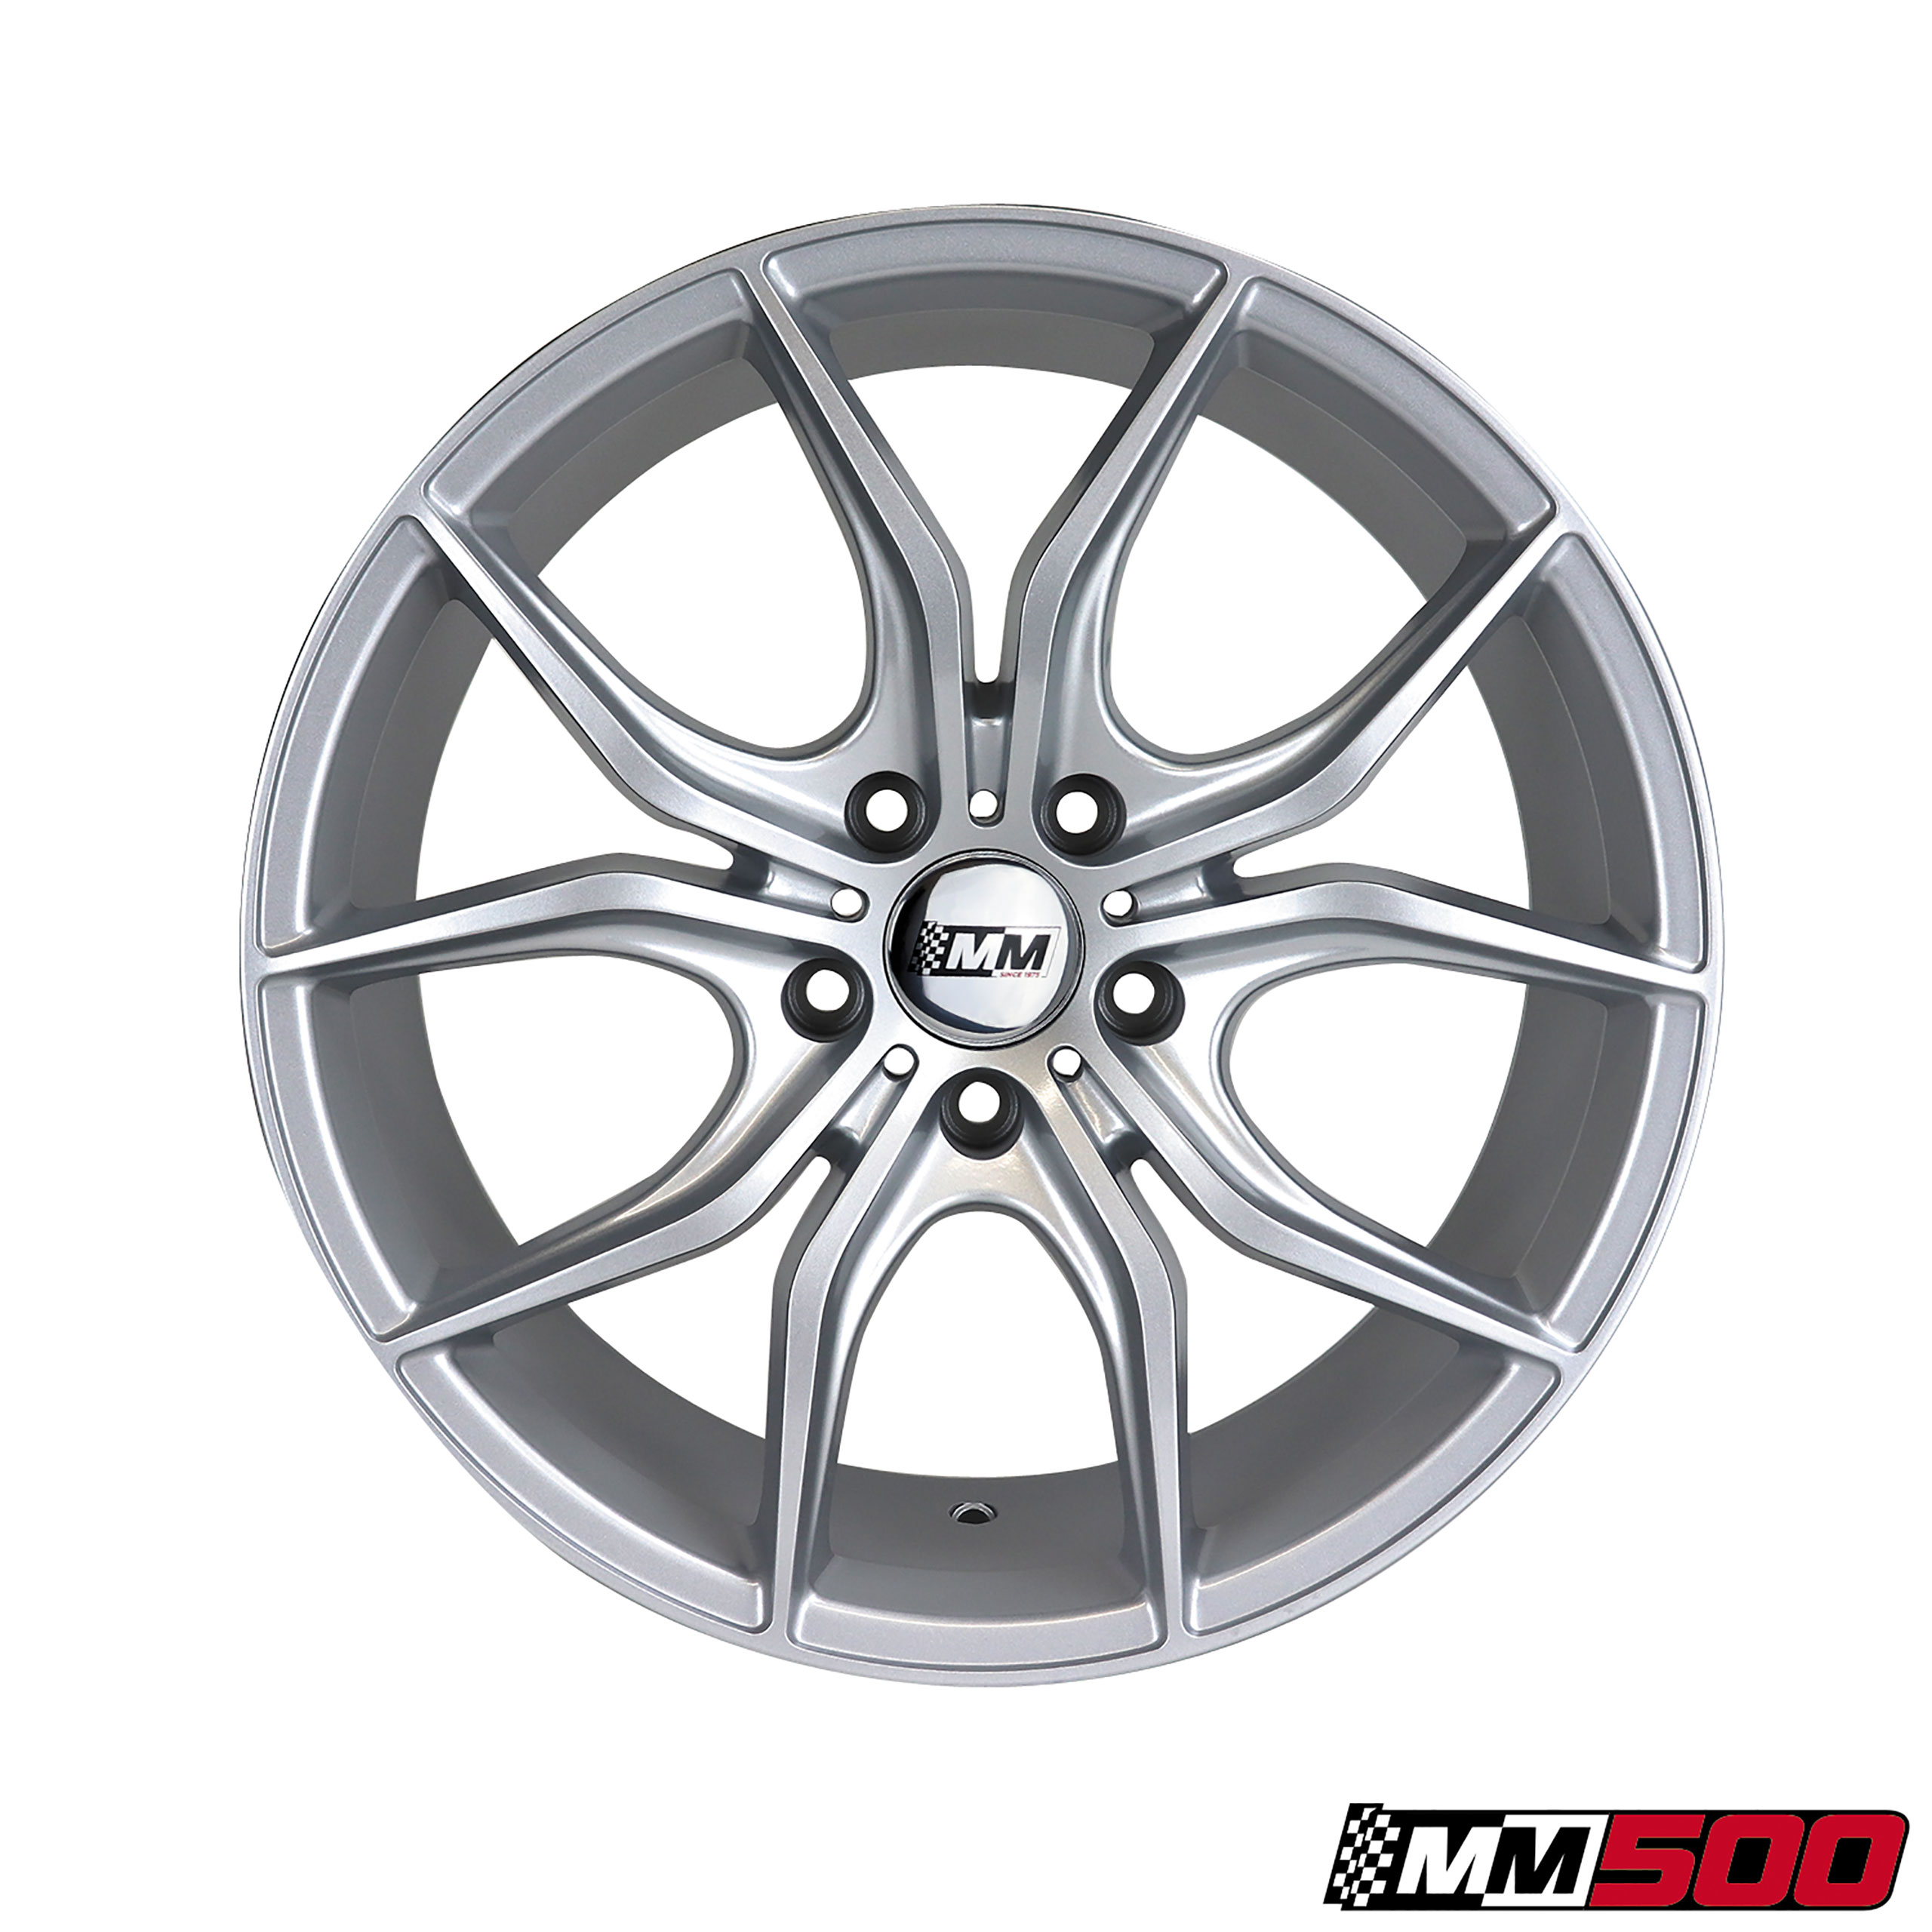 1979-2014 Ford Mustang C3-C7 MM500 18x8 Wheel - Silver CA-MA12386 